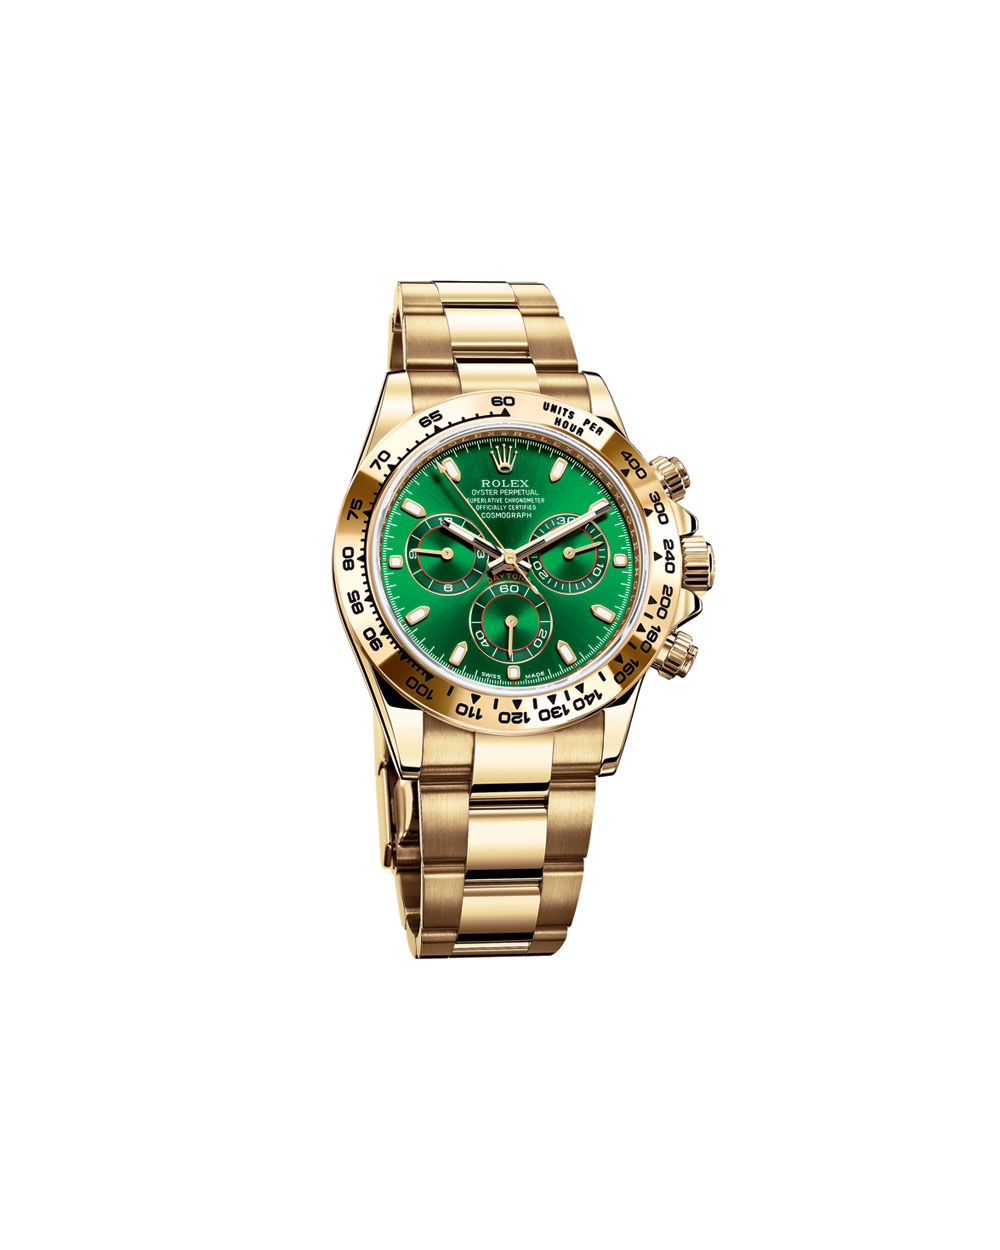 Rolex watch, $49,300, from Partridge Jewellers